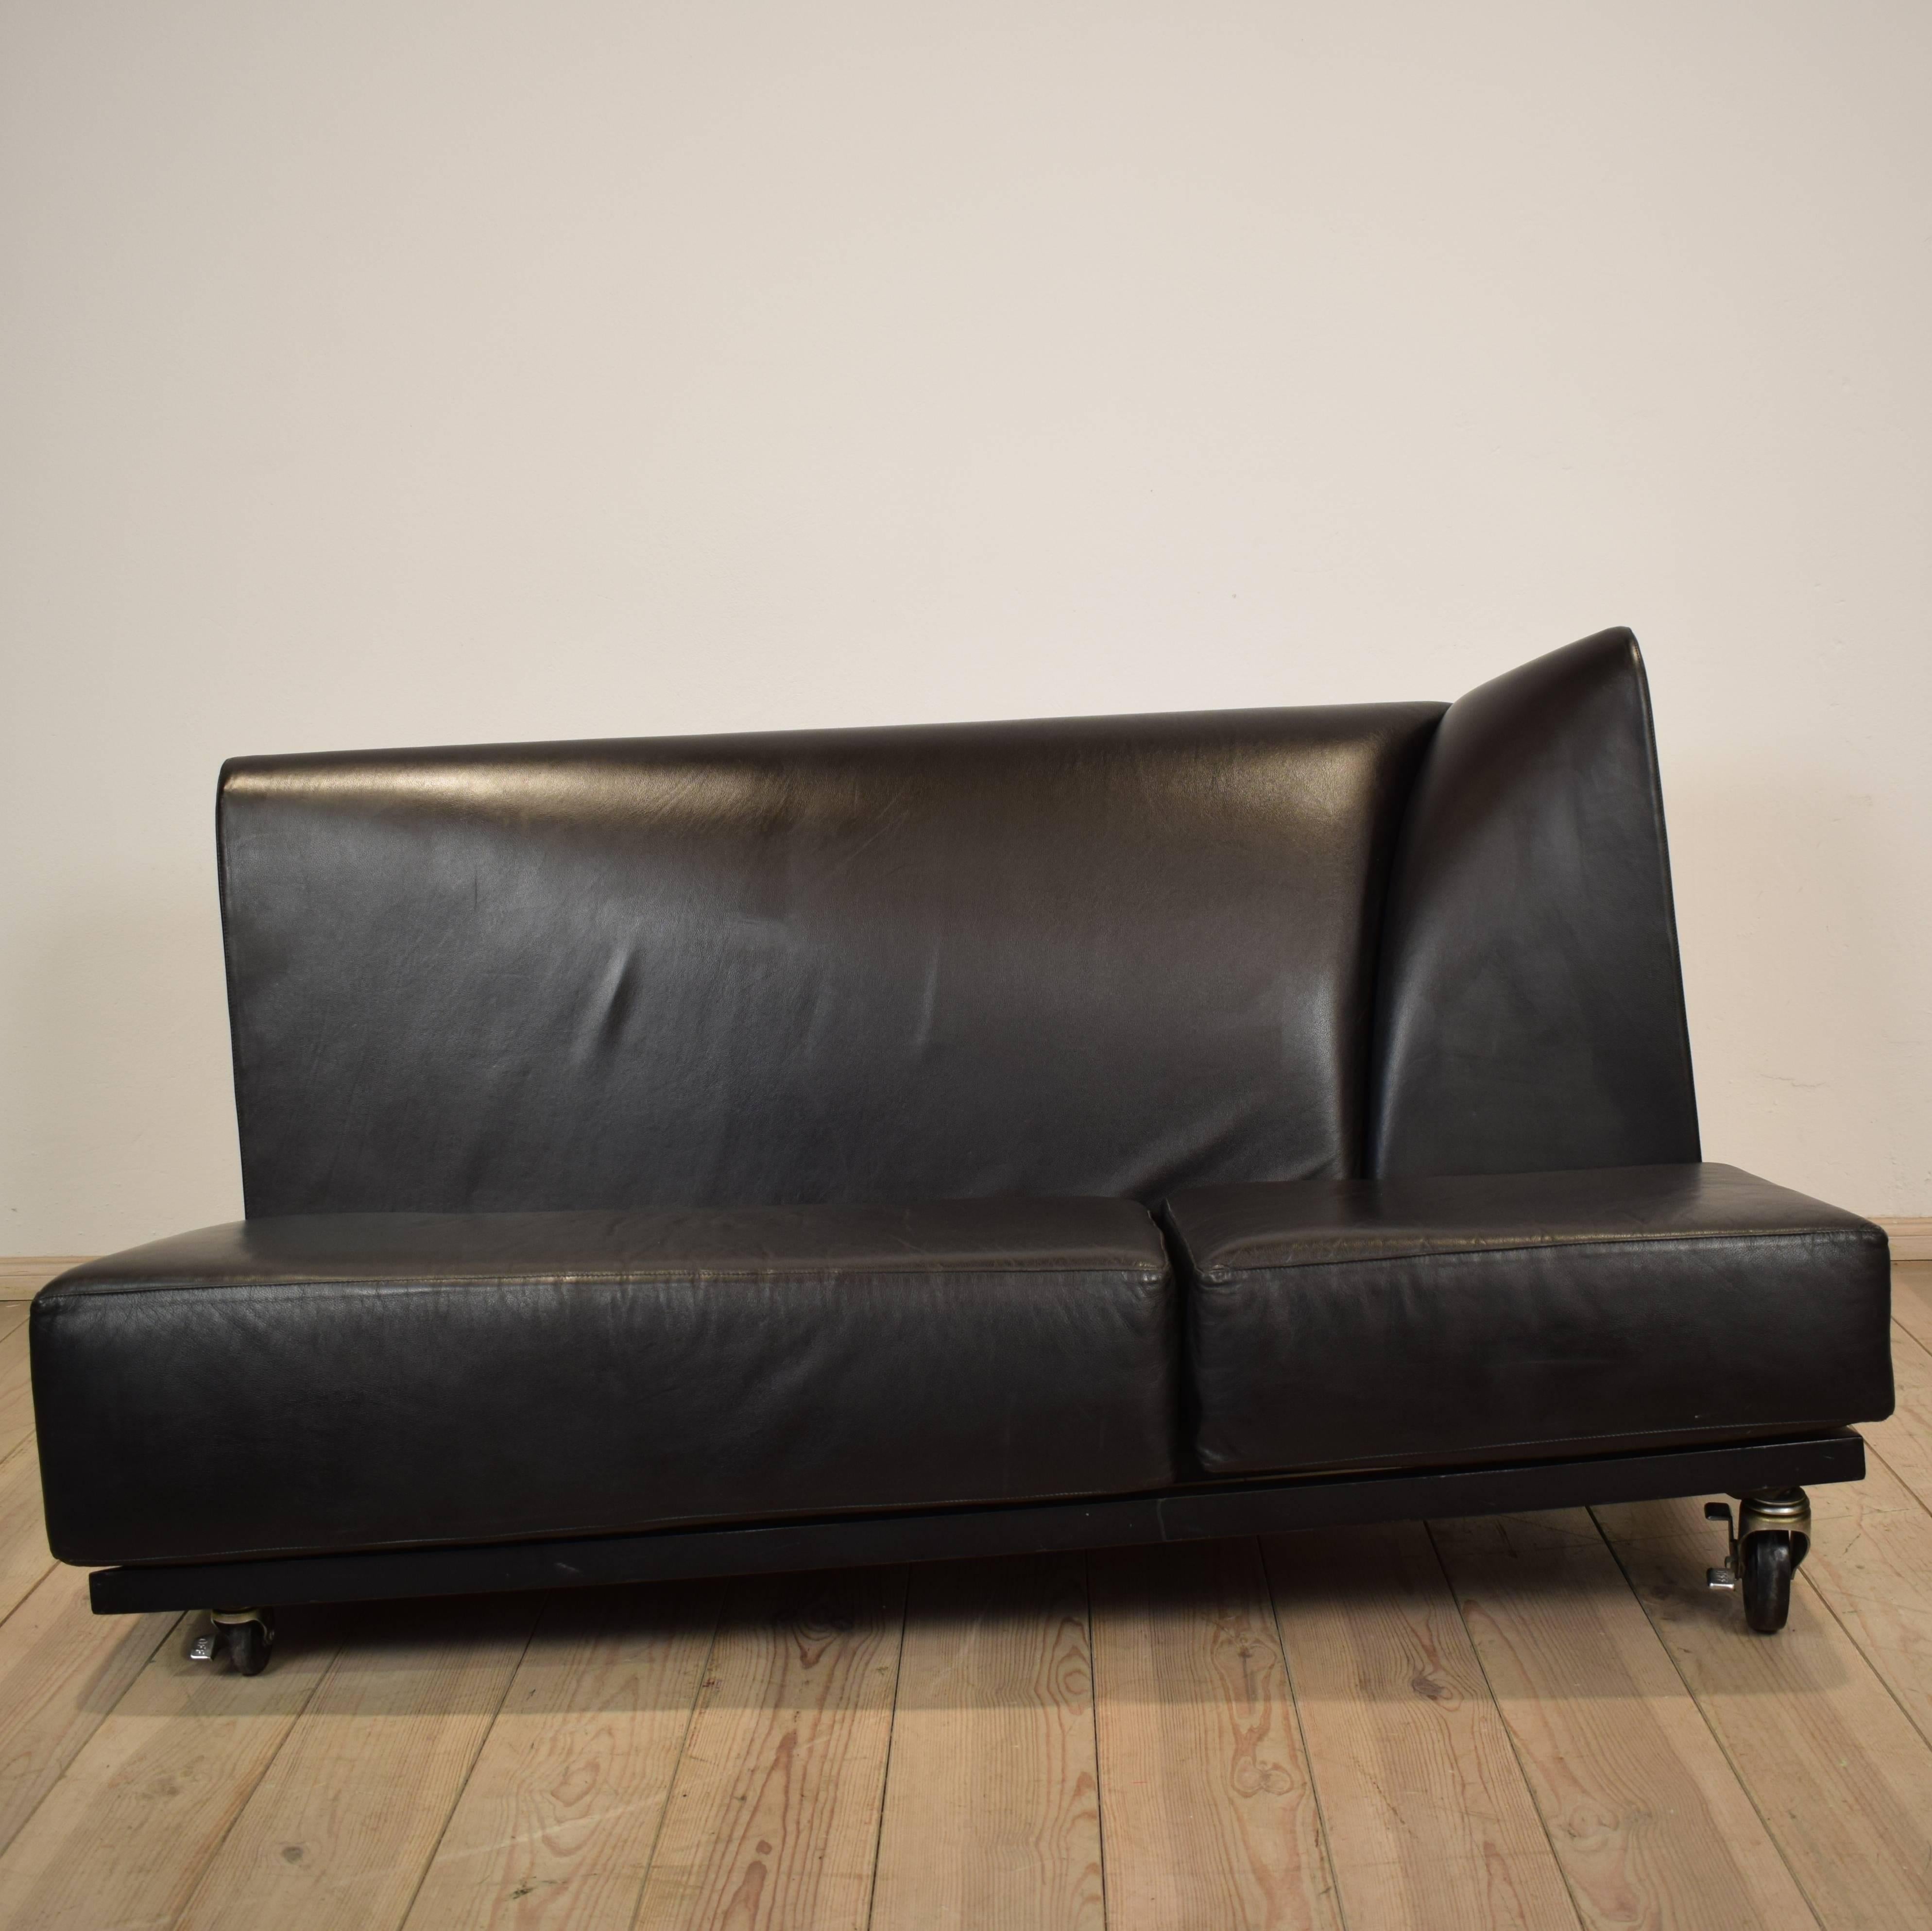 Post-Modern Mid-Century Memphis Black Leather Sofa by Pallucco and Rivier for Pallucco, 1988